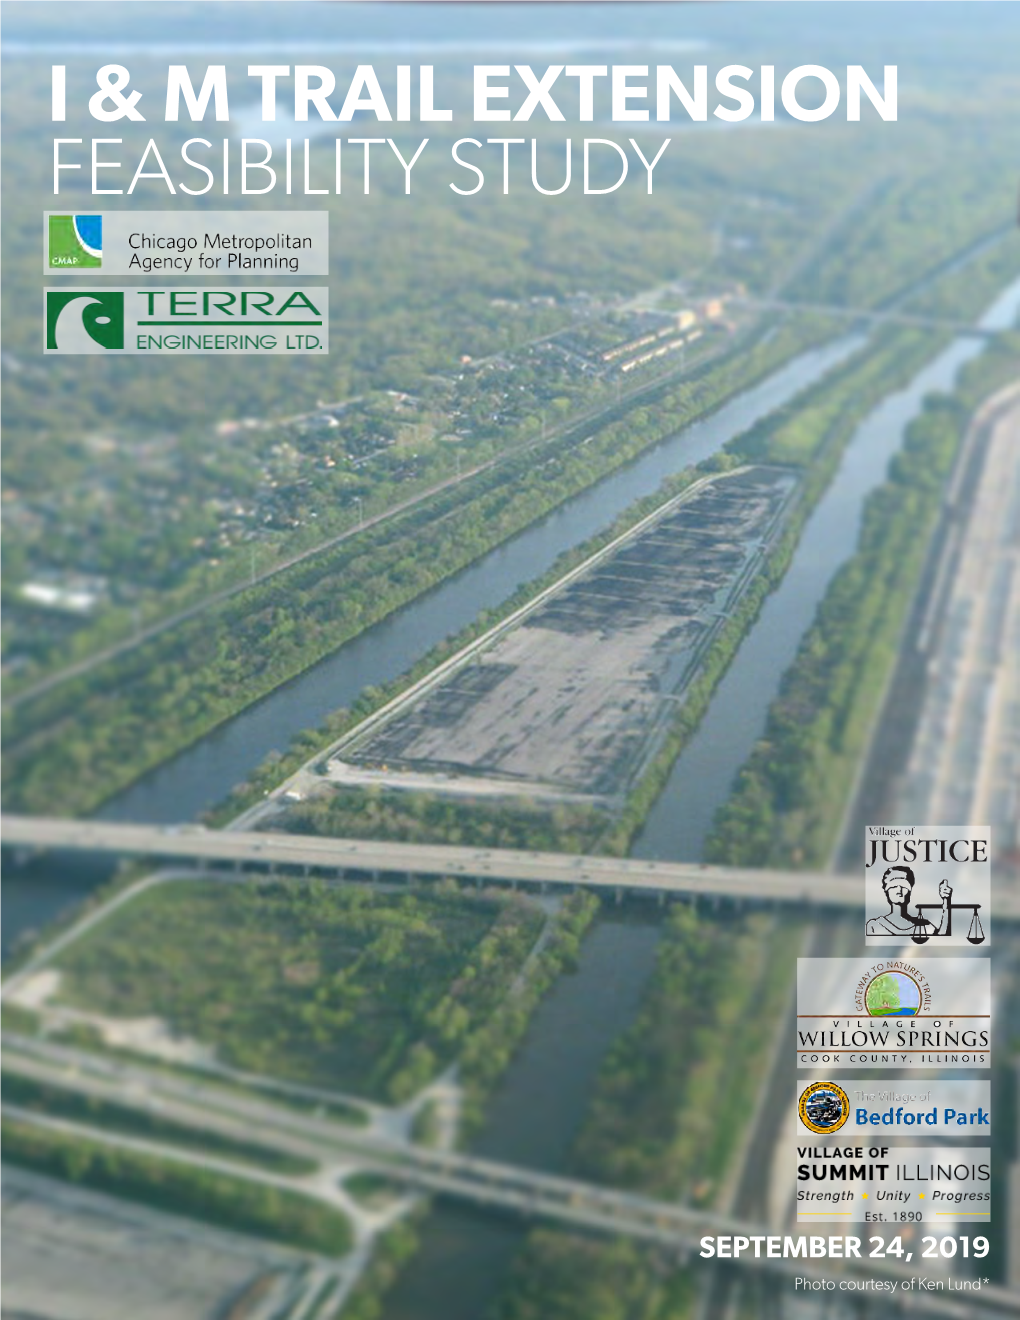 I & M Trail Extension Feasibility Study